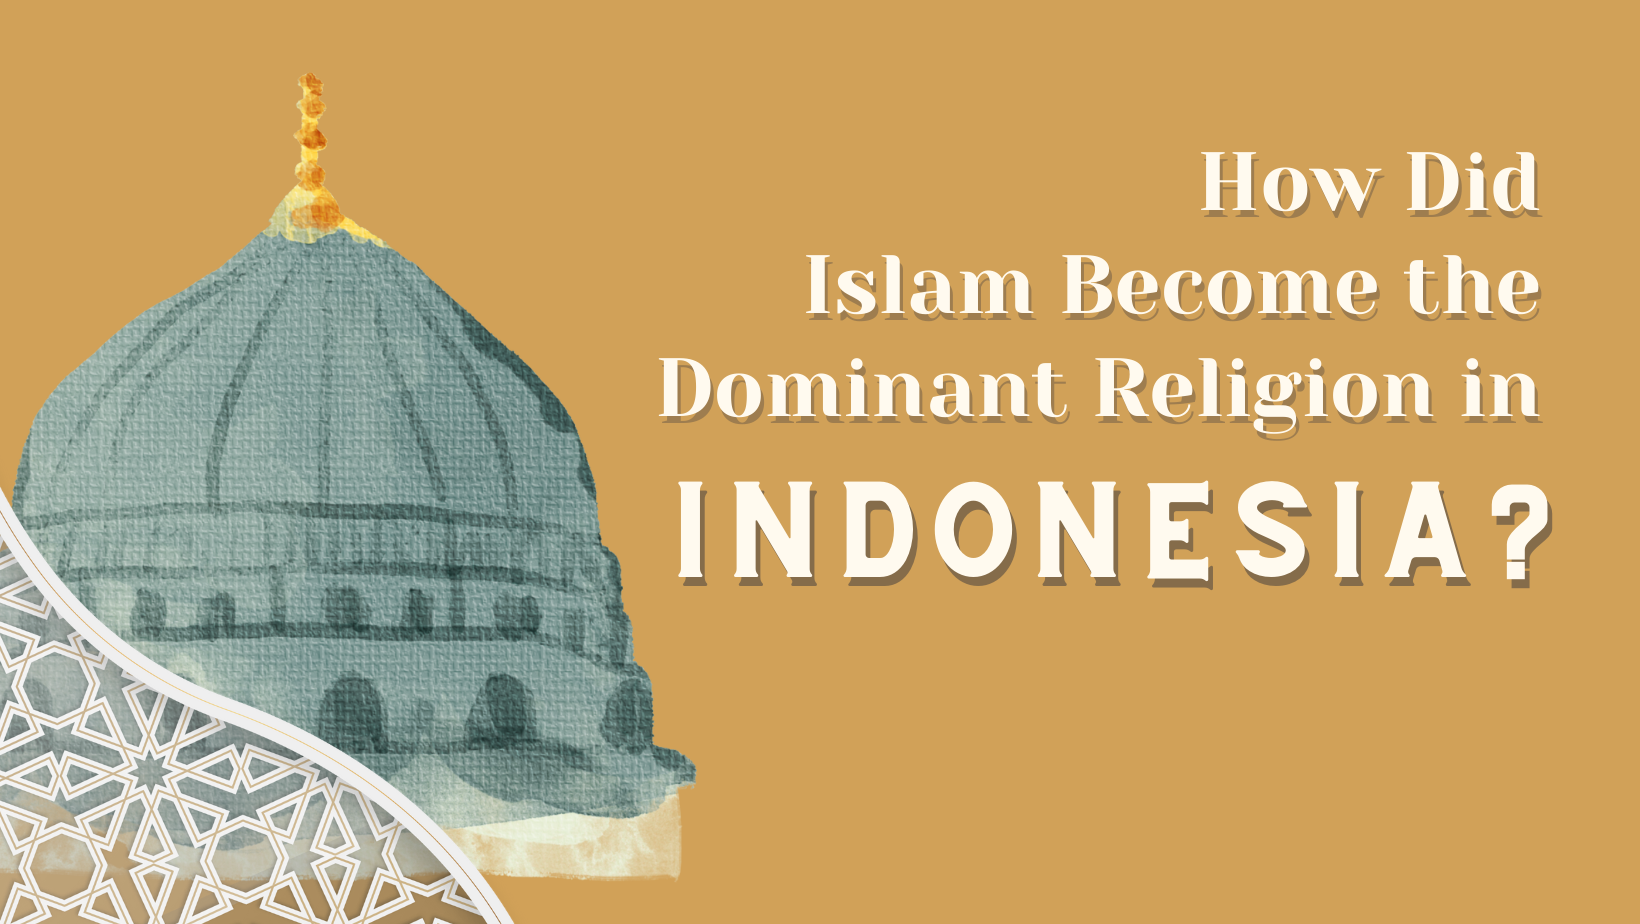 How did Islam Become the Dominant Religion in Indonesia?